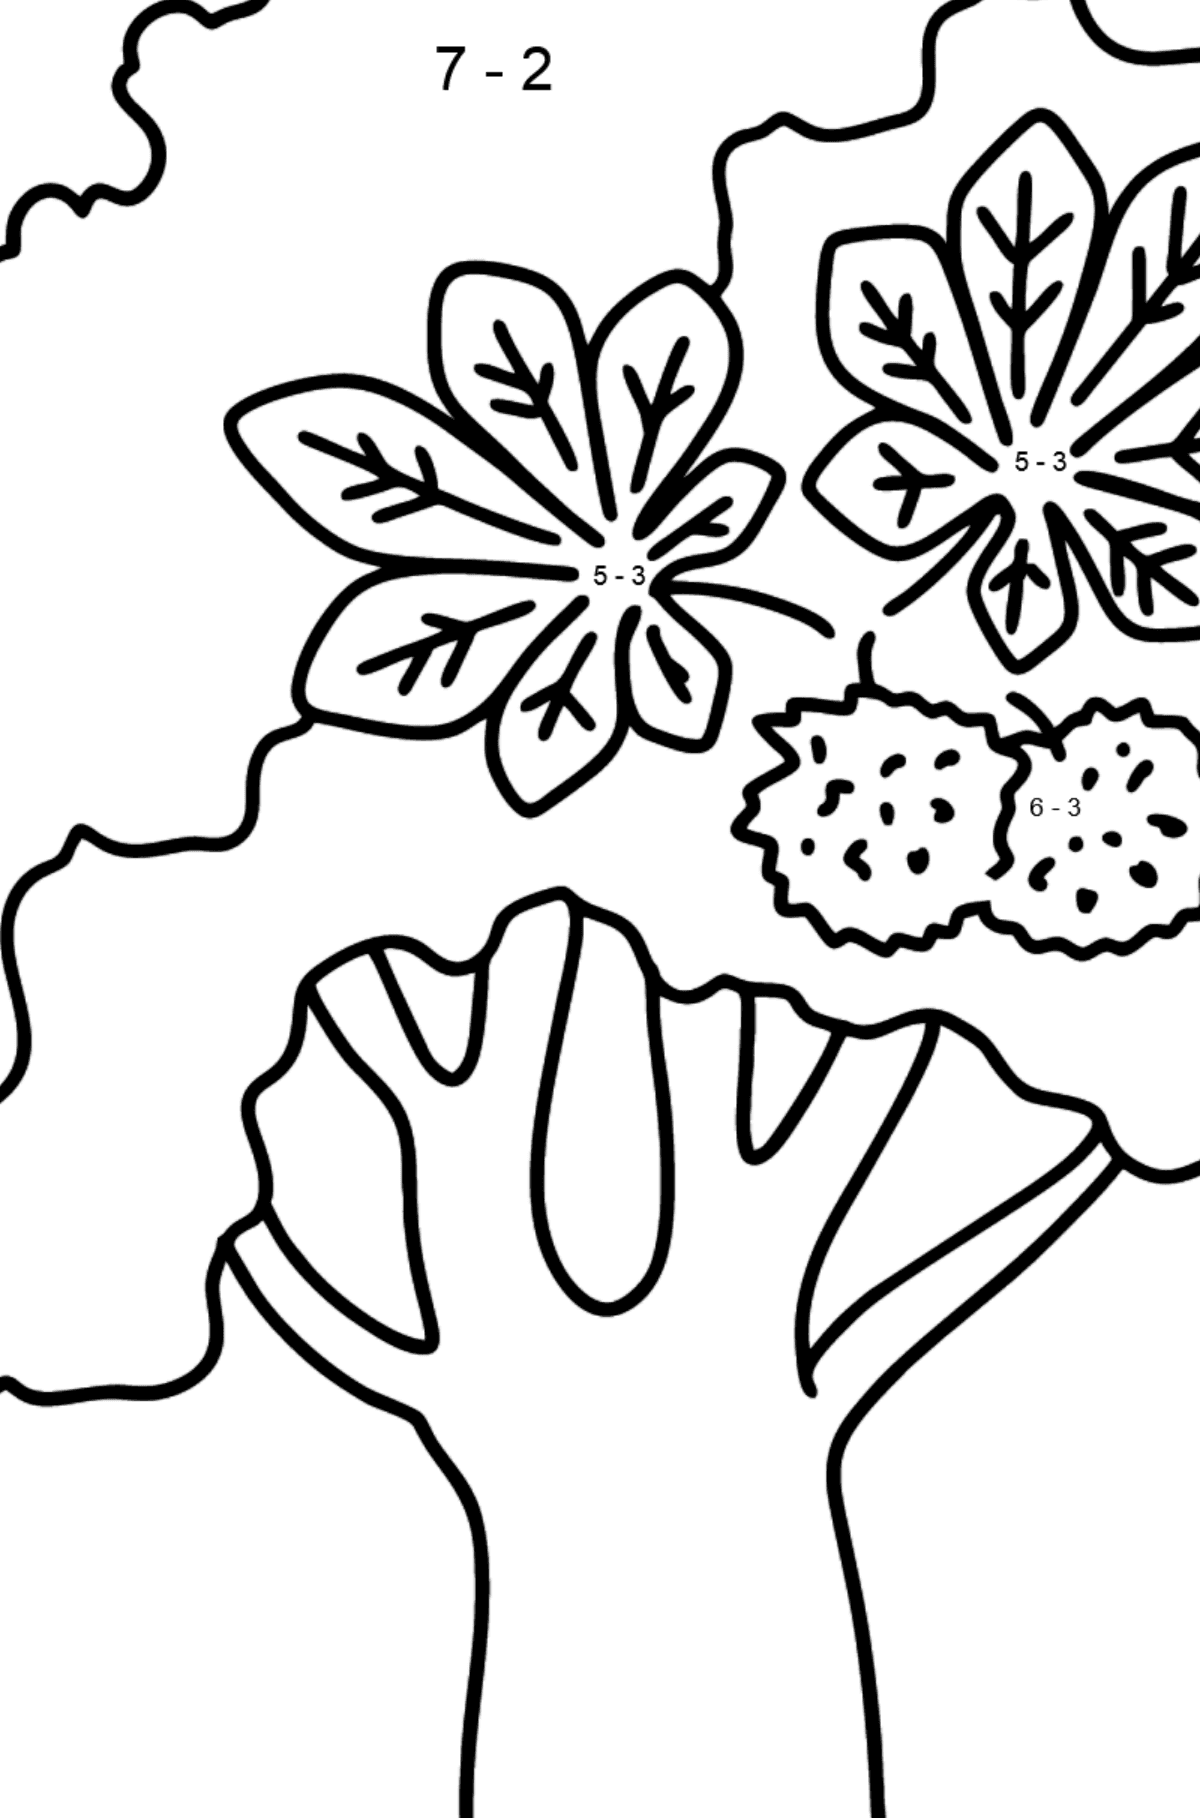 Chestnut coloring page - Math Coloring - Subtraction for Kids